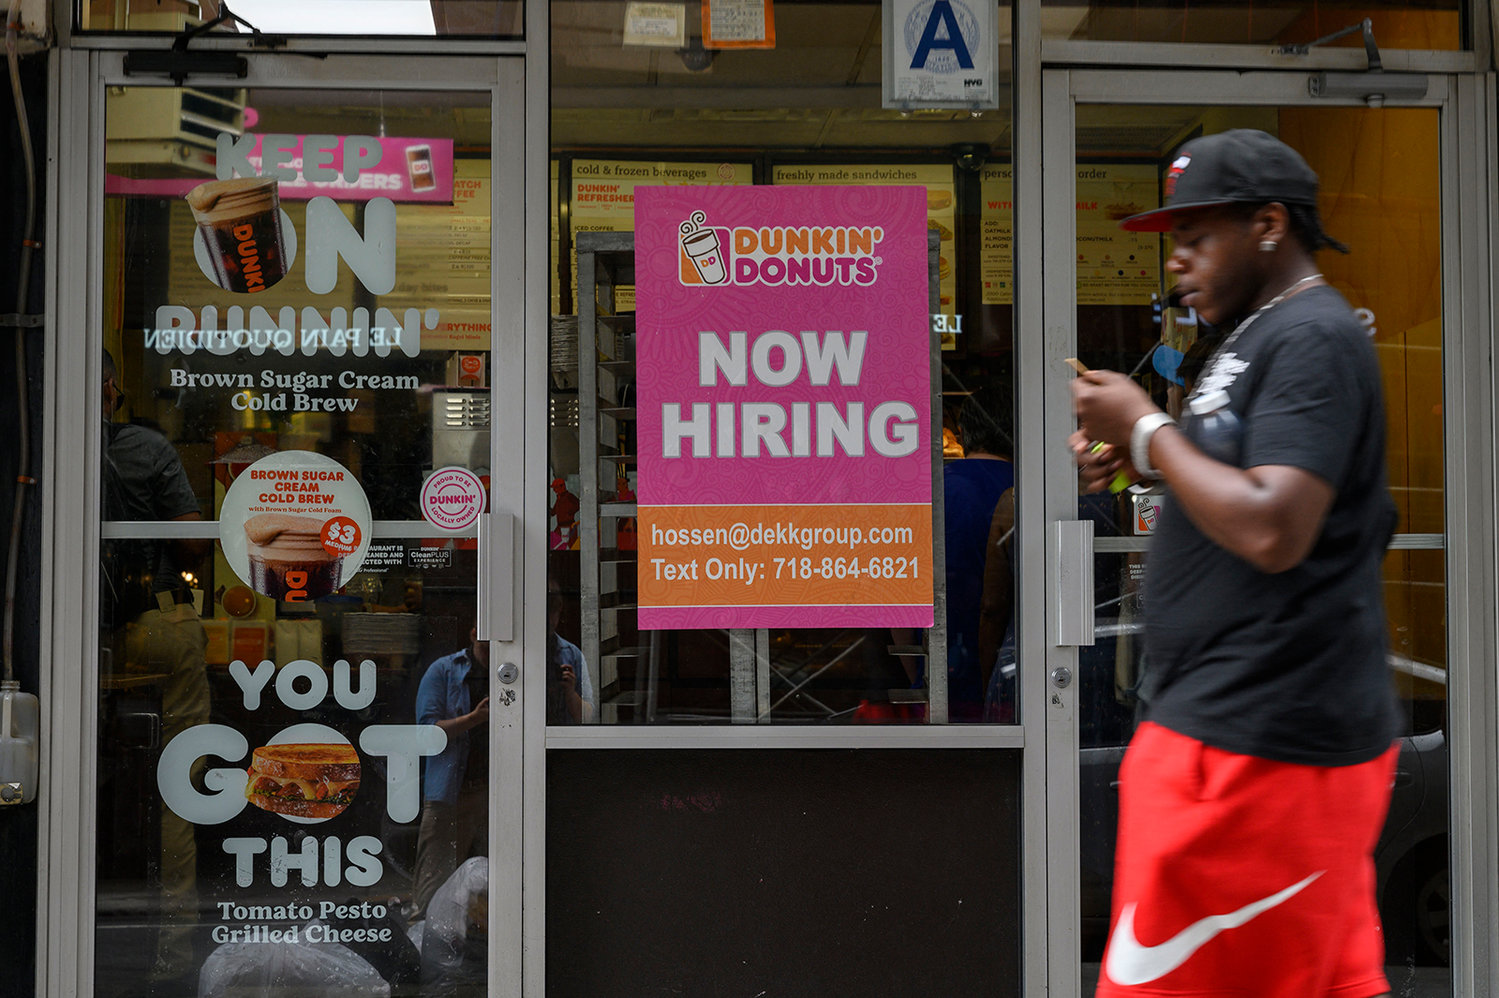 A man walks past a "Now Hiring" sign in New York City on July 8, 2022. (Angela Weiss/AFP via Getty Images/TNS)